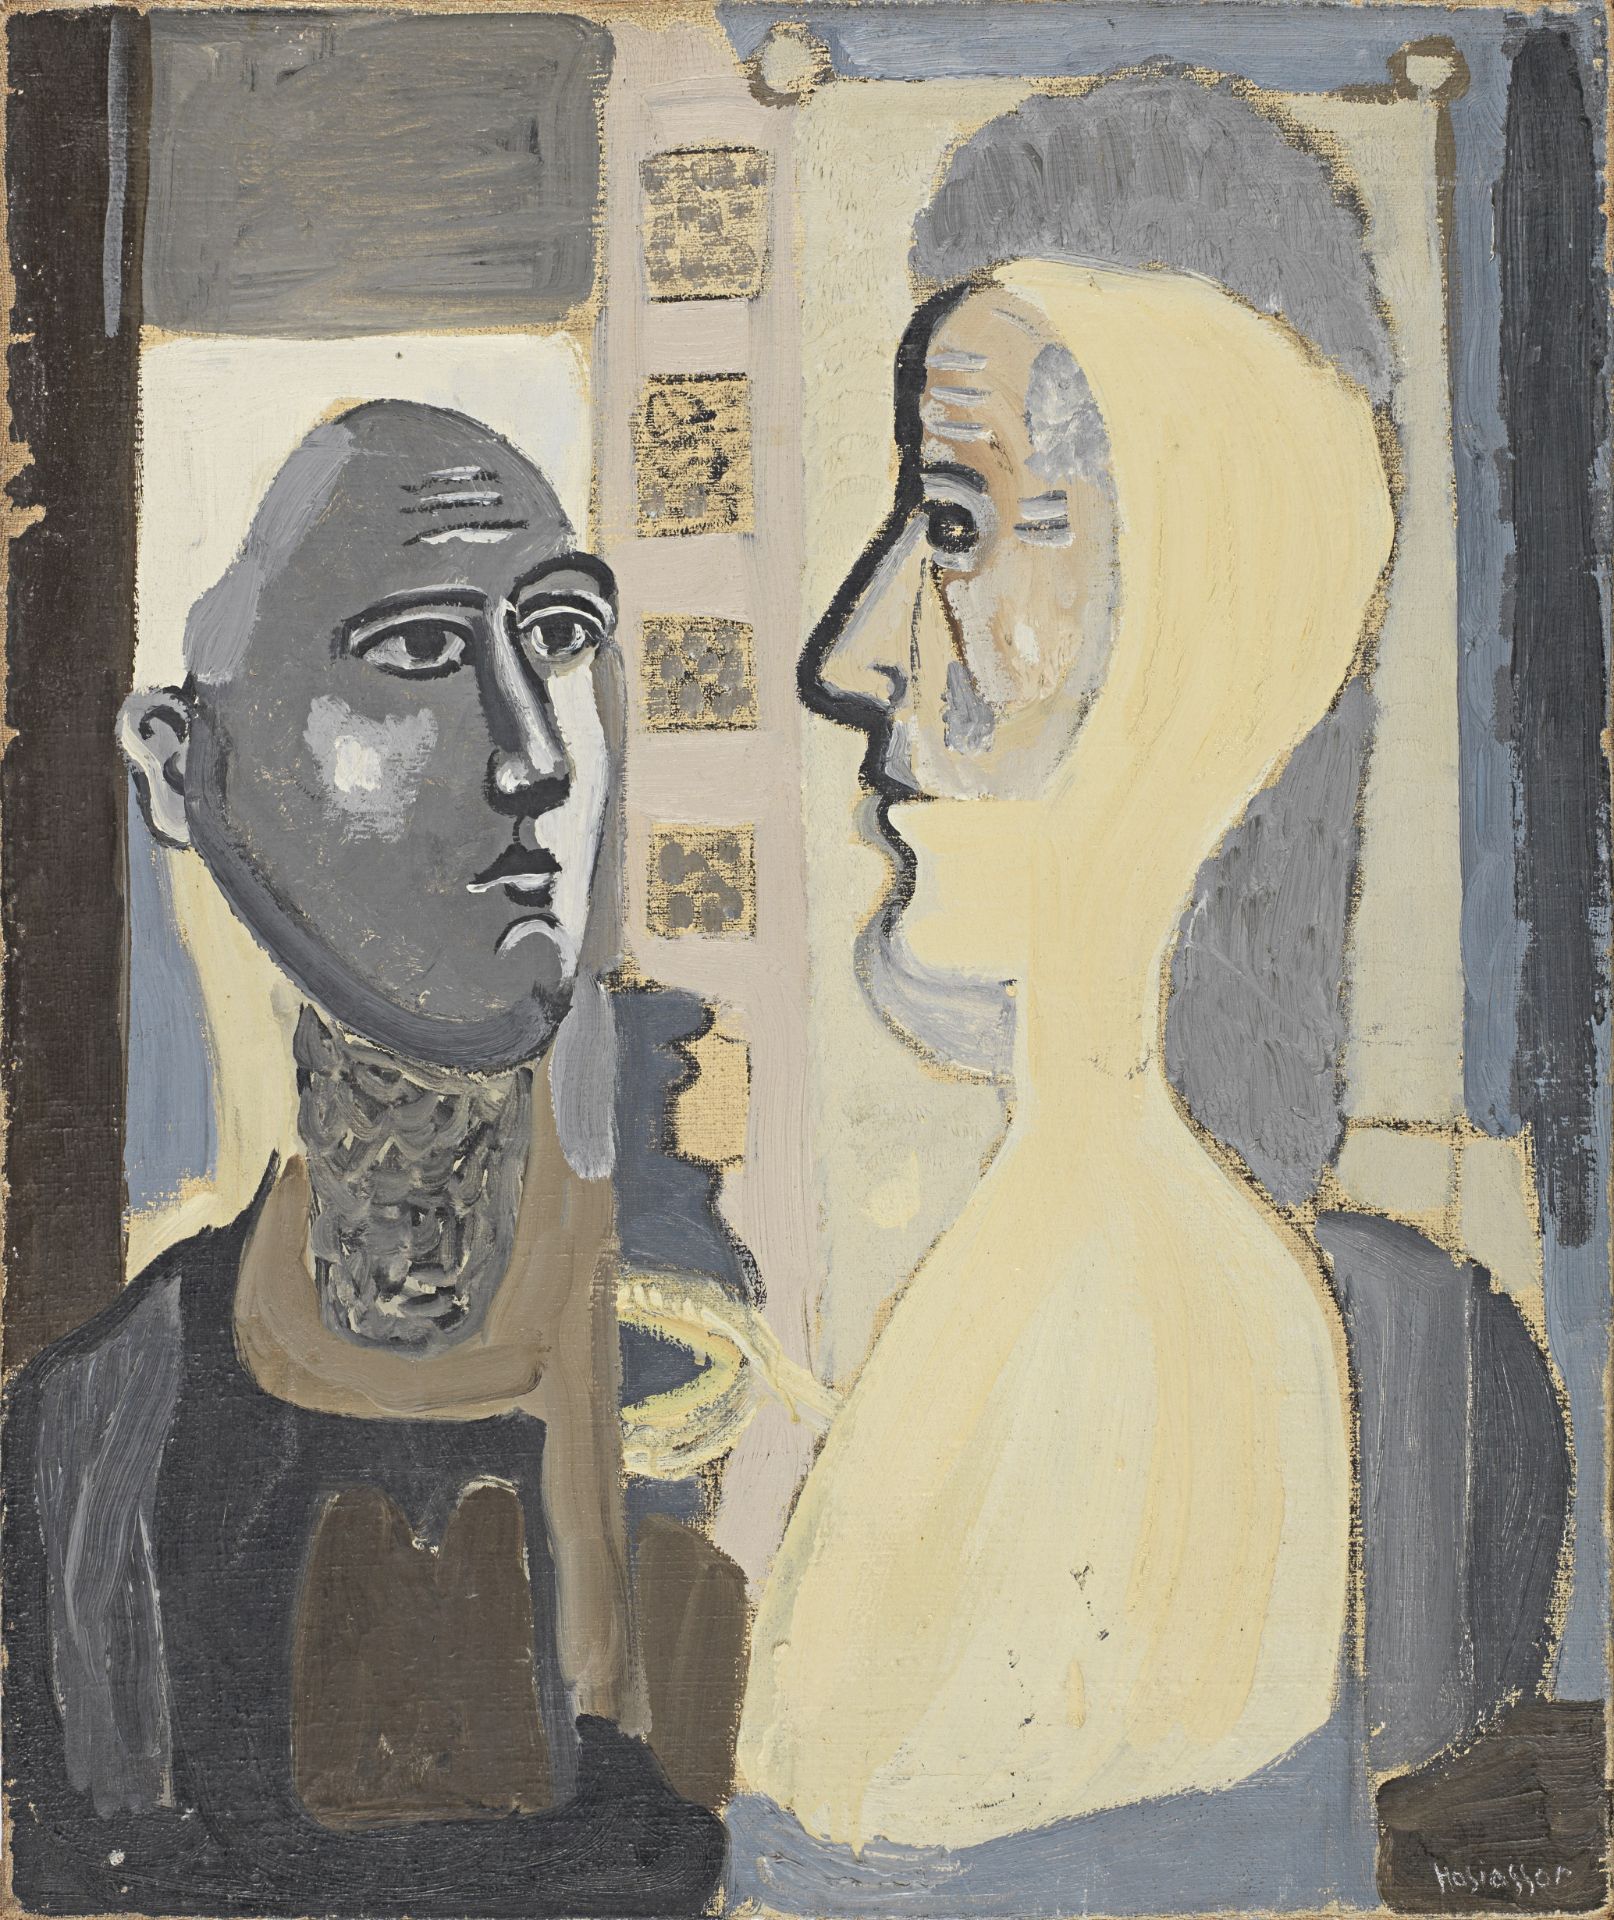 Philippe Hosiassion (Russian/French, 1898-1978) Couple unframed